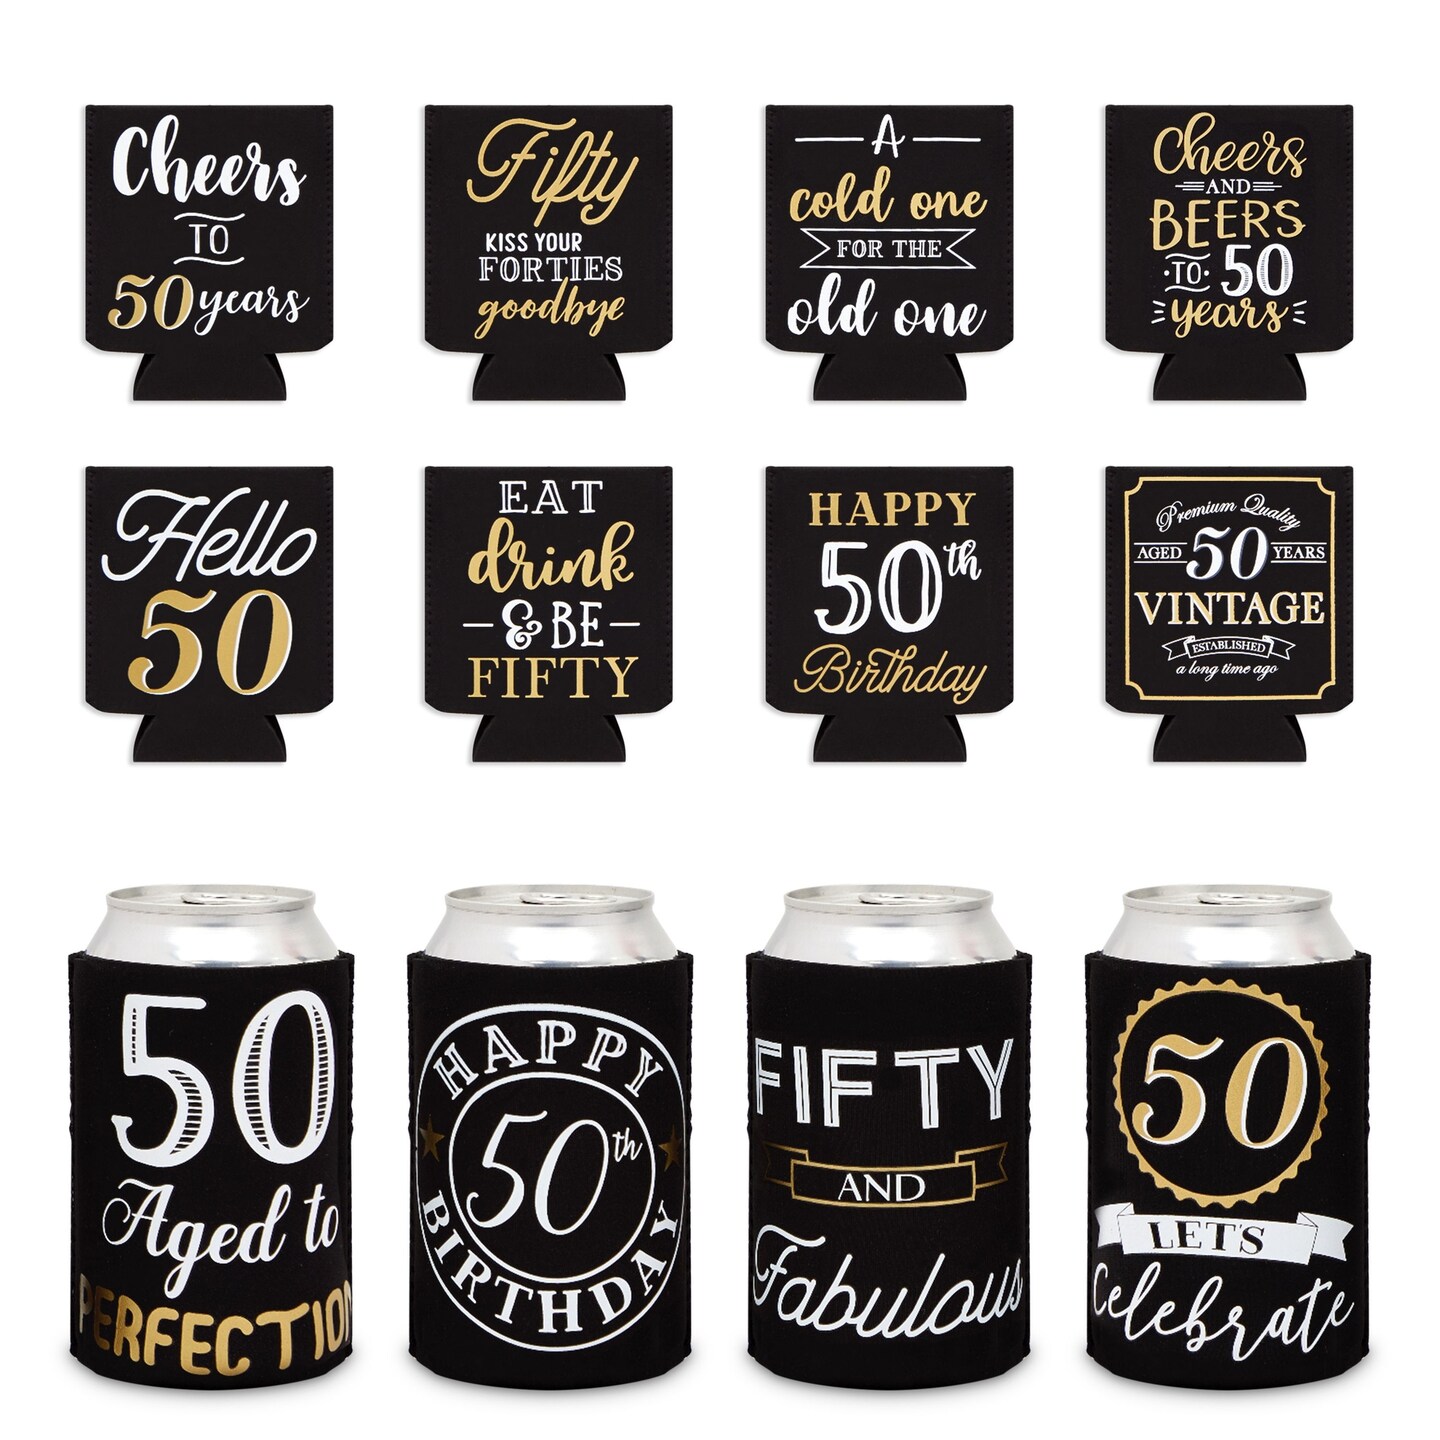 12 Pack 50th Birthday Can Cooler Sleeves for Soda, Beverages - Cheers and Beers to 50 Years Decorations and Party Favors for Women, Men (Black and Gold, 2.5x4 in)